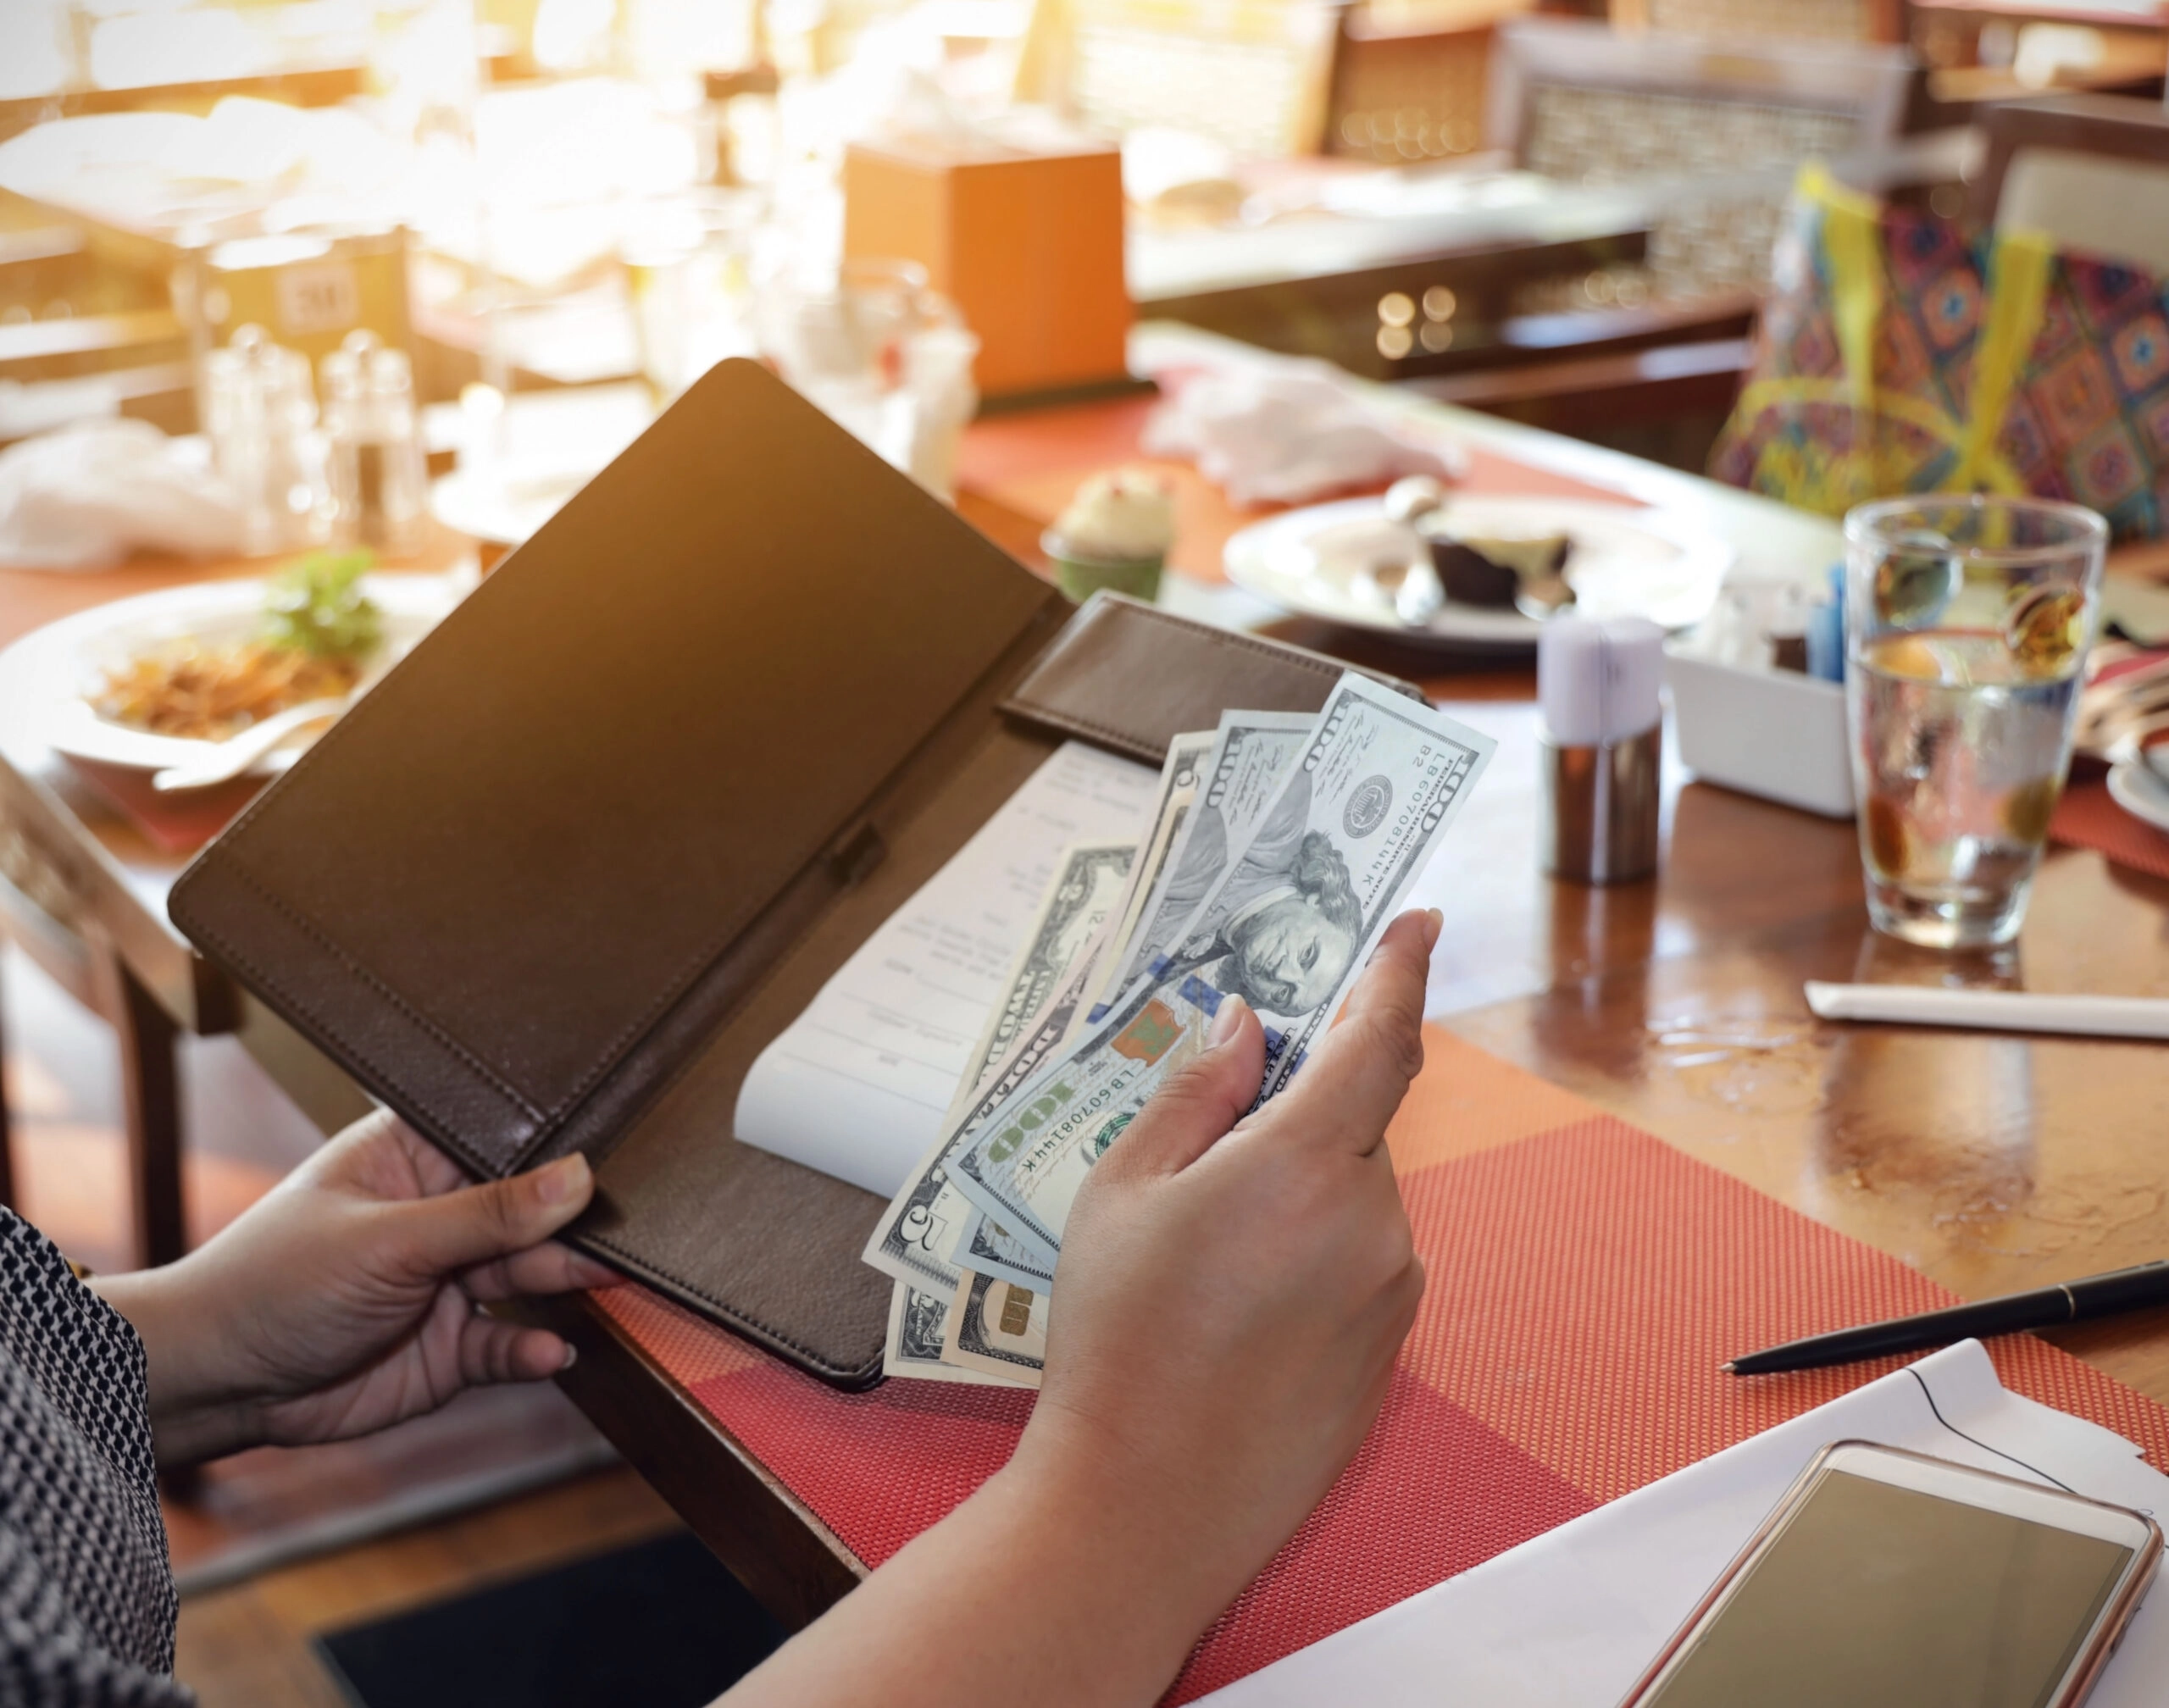 Is Cash Still King for Restaurant Goers? Exploring the Trend of Cashless Payments